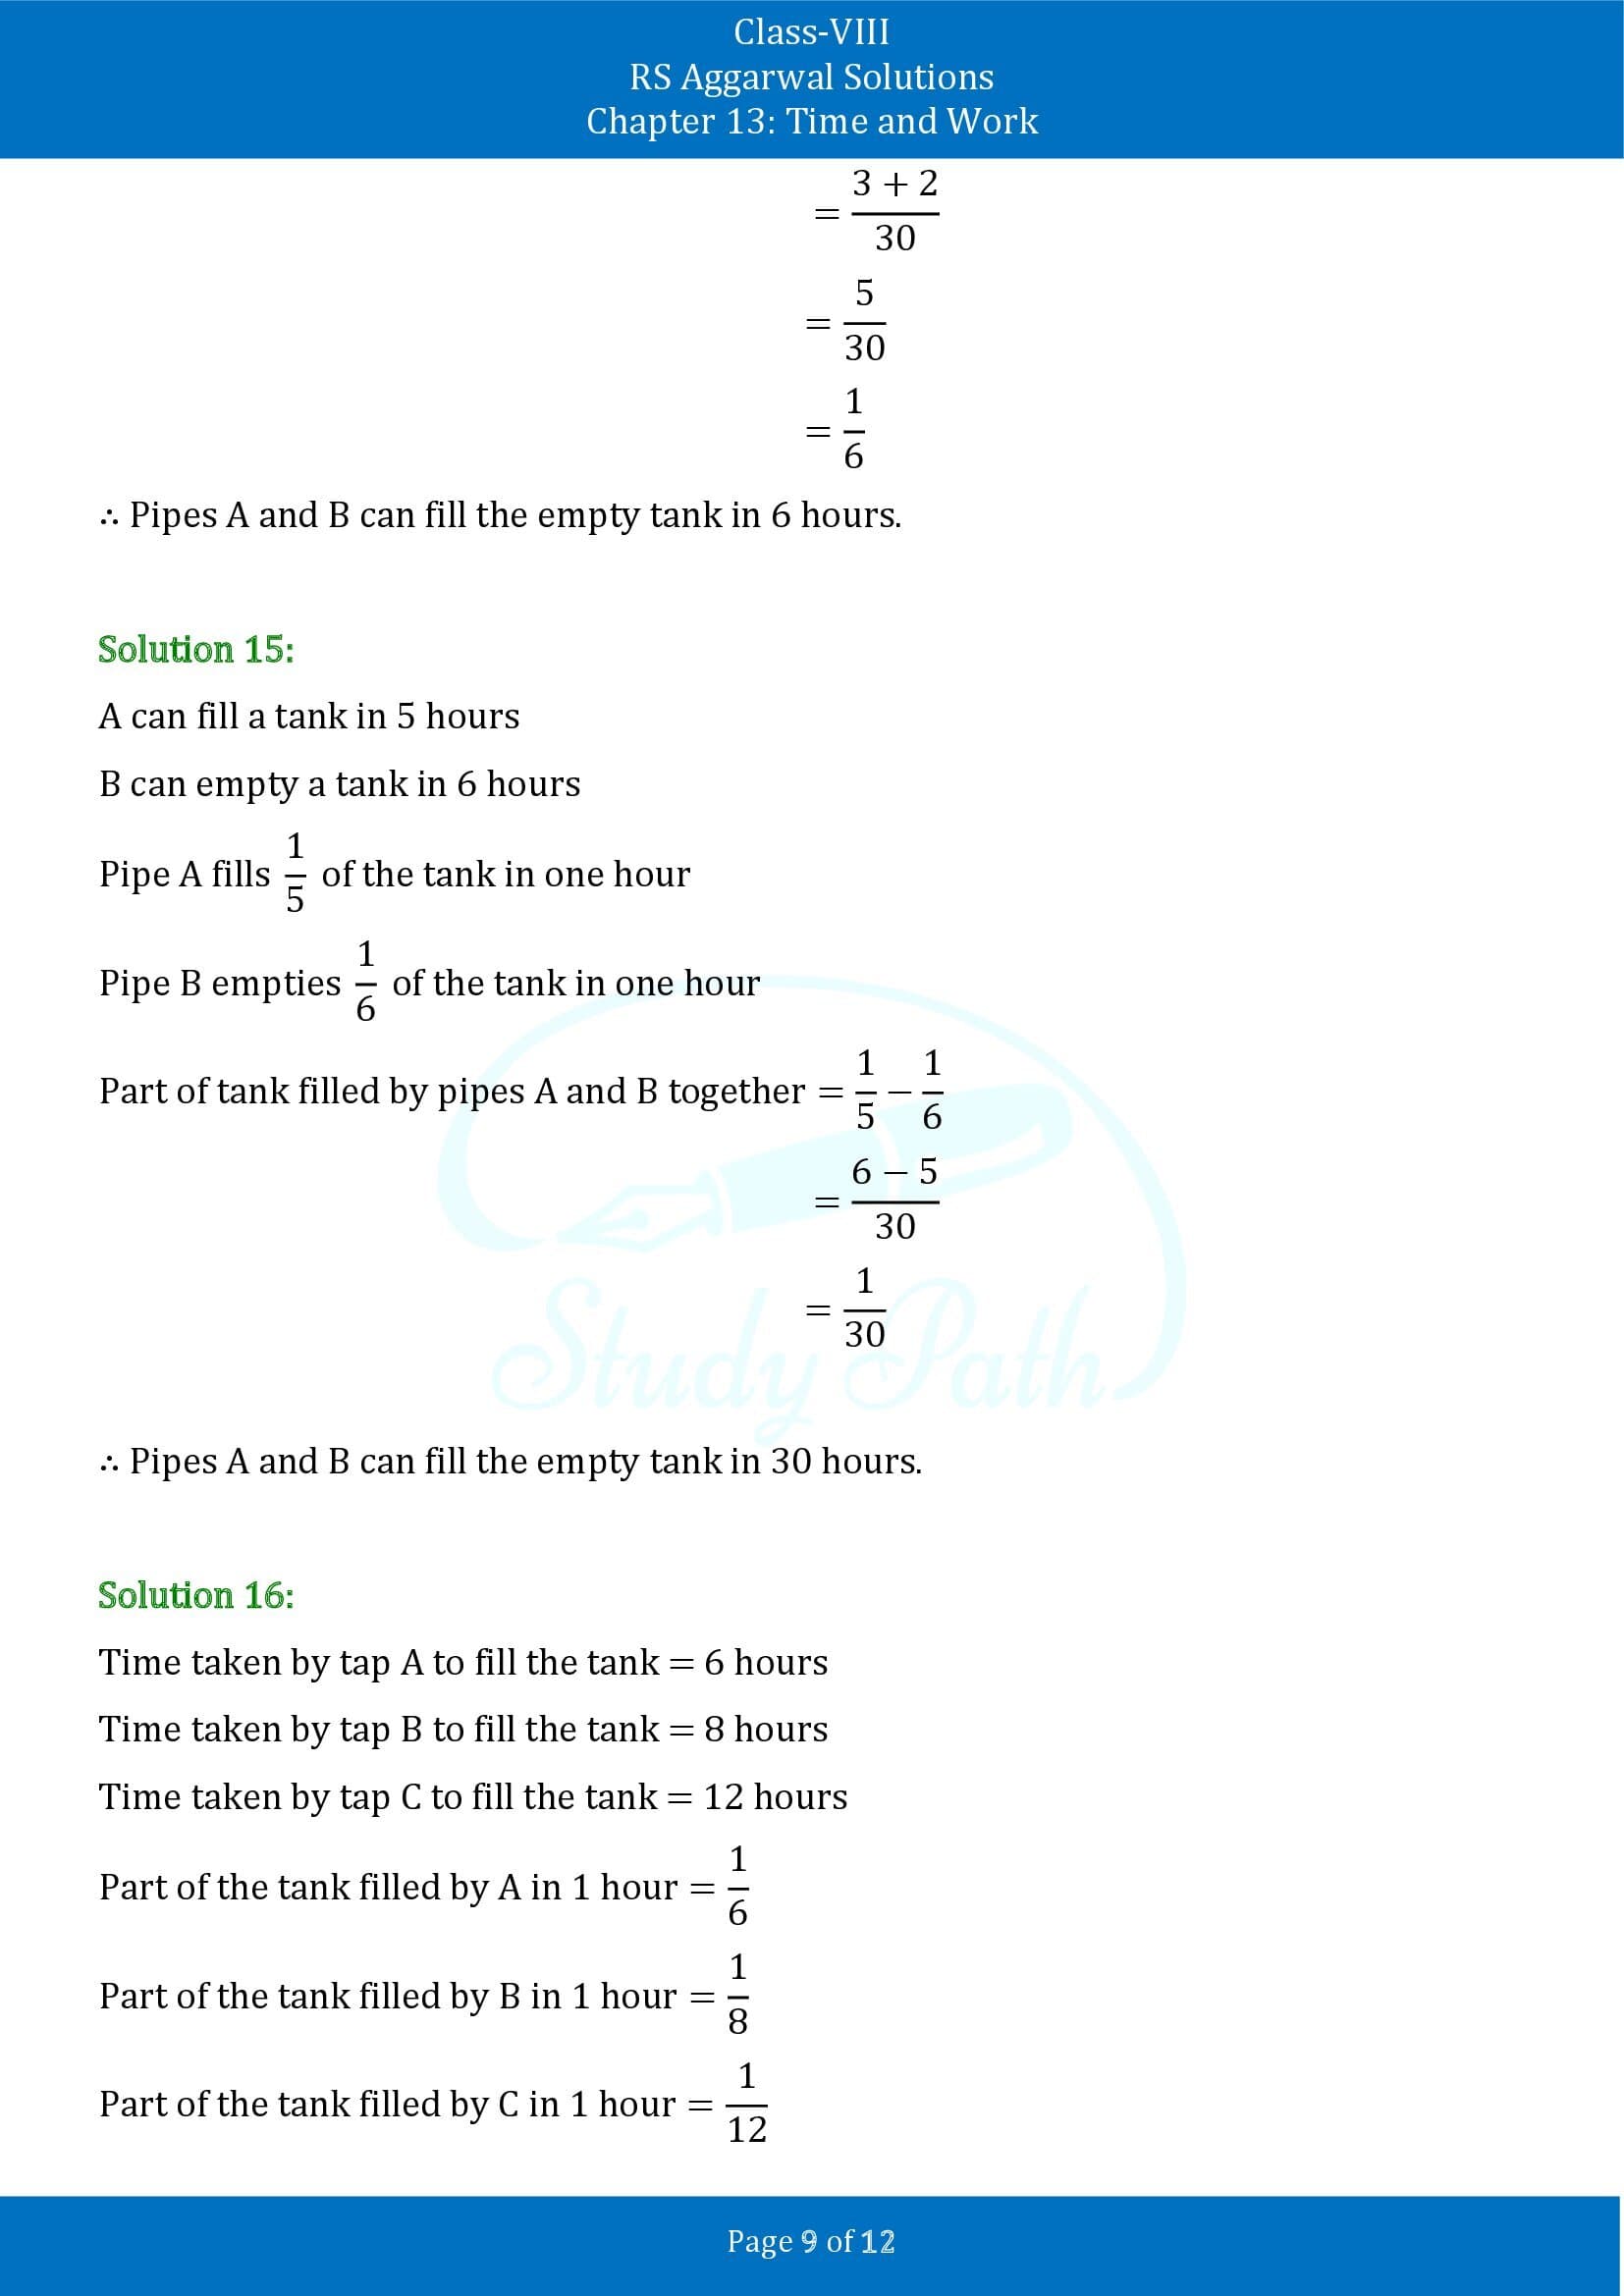 RS Aggarwal Solutions Class 8 Chapter 13 Time and Work Exercise 13A 00009